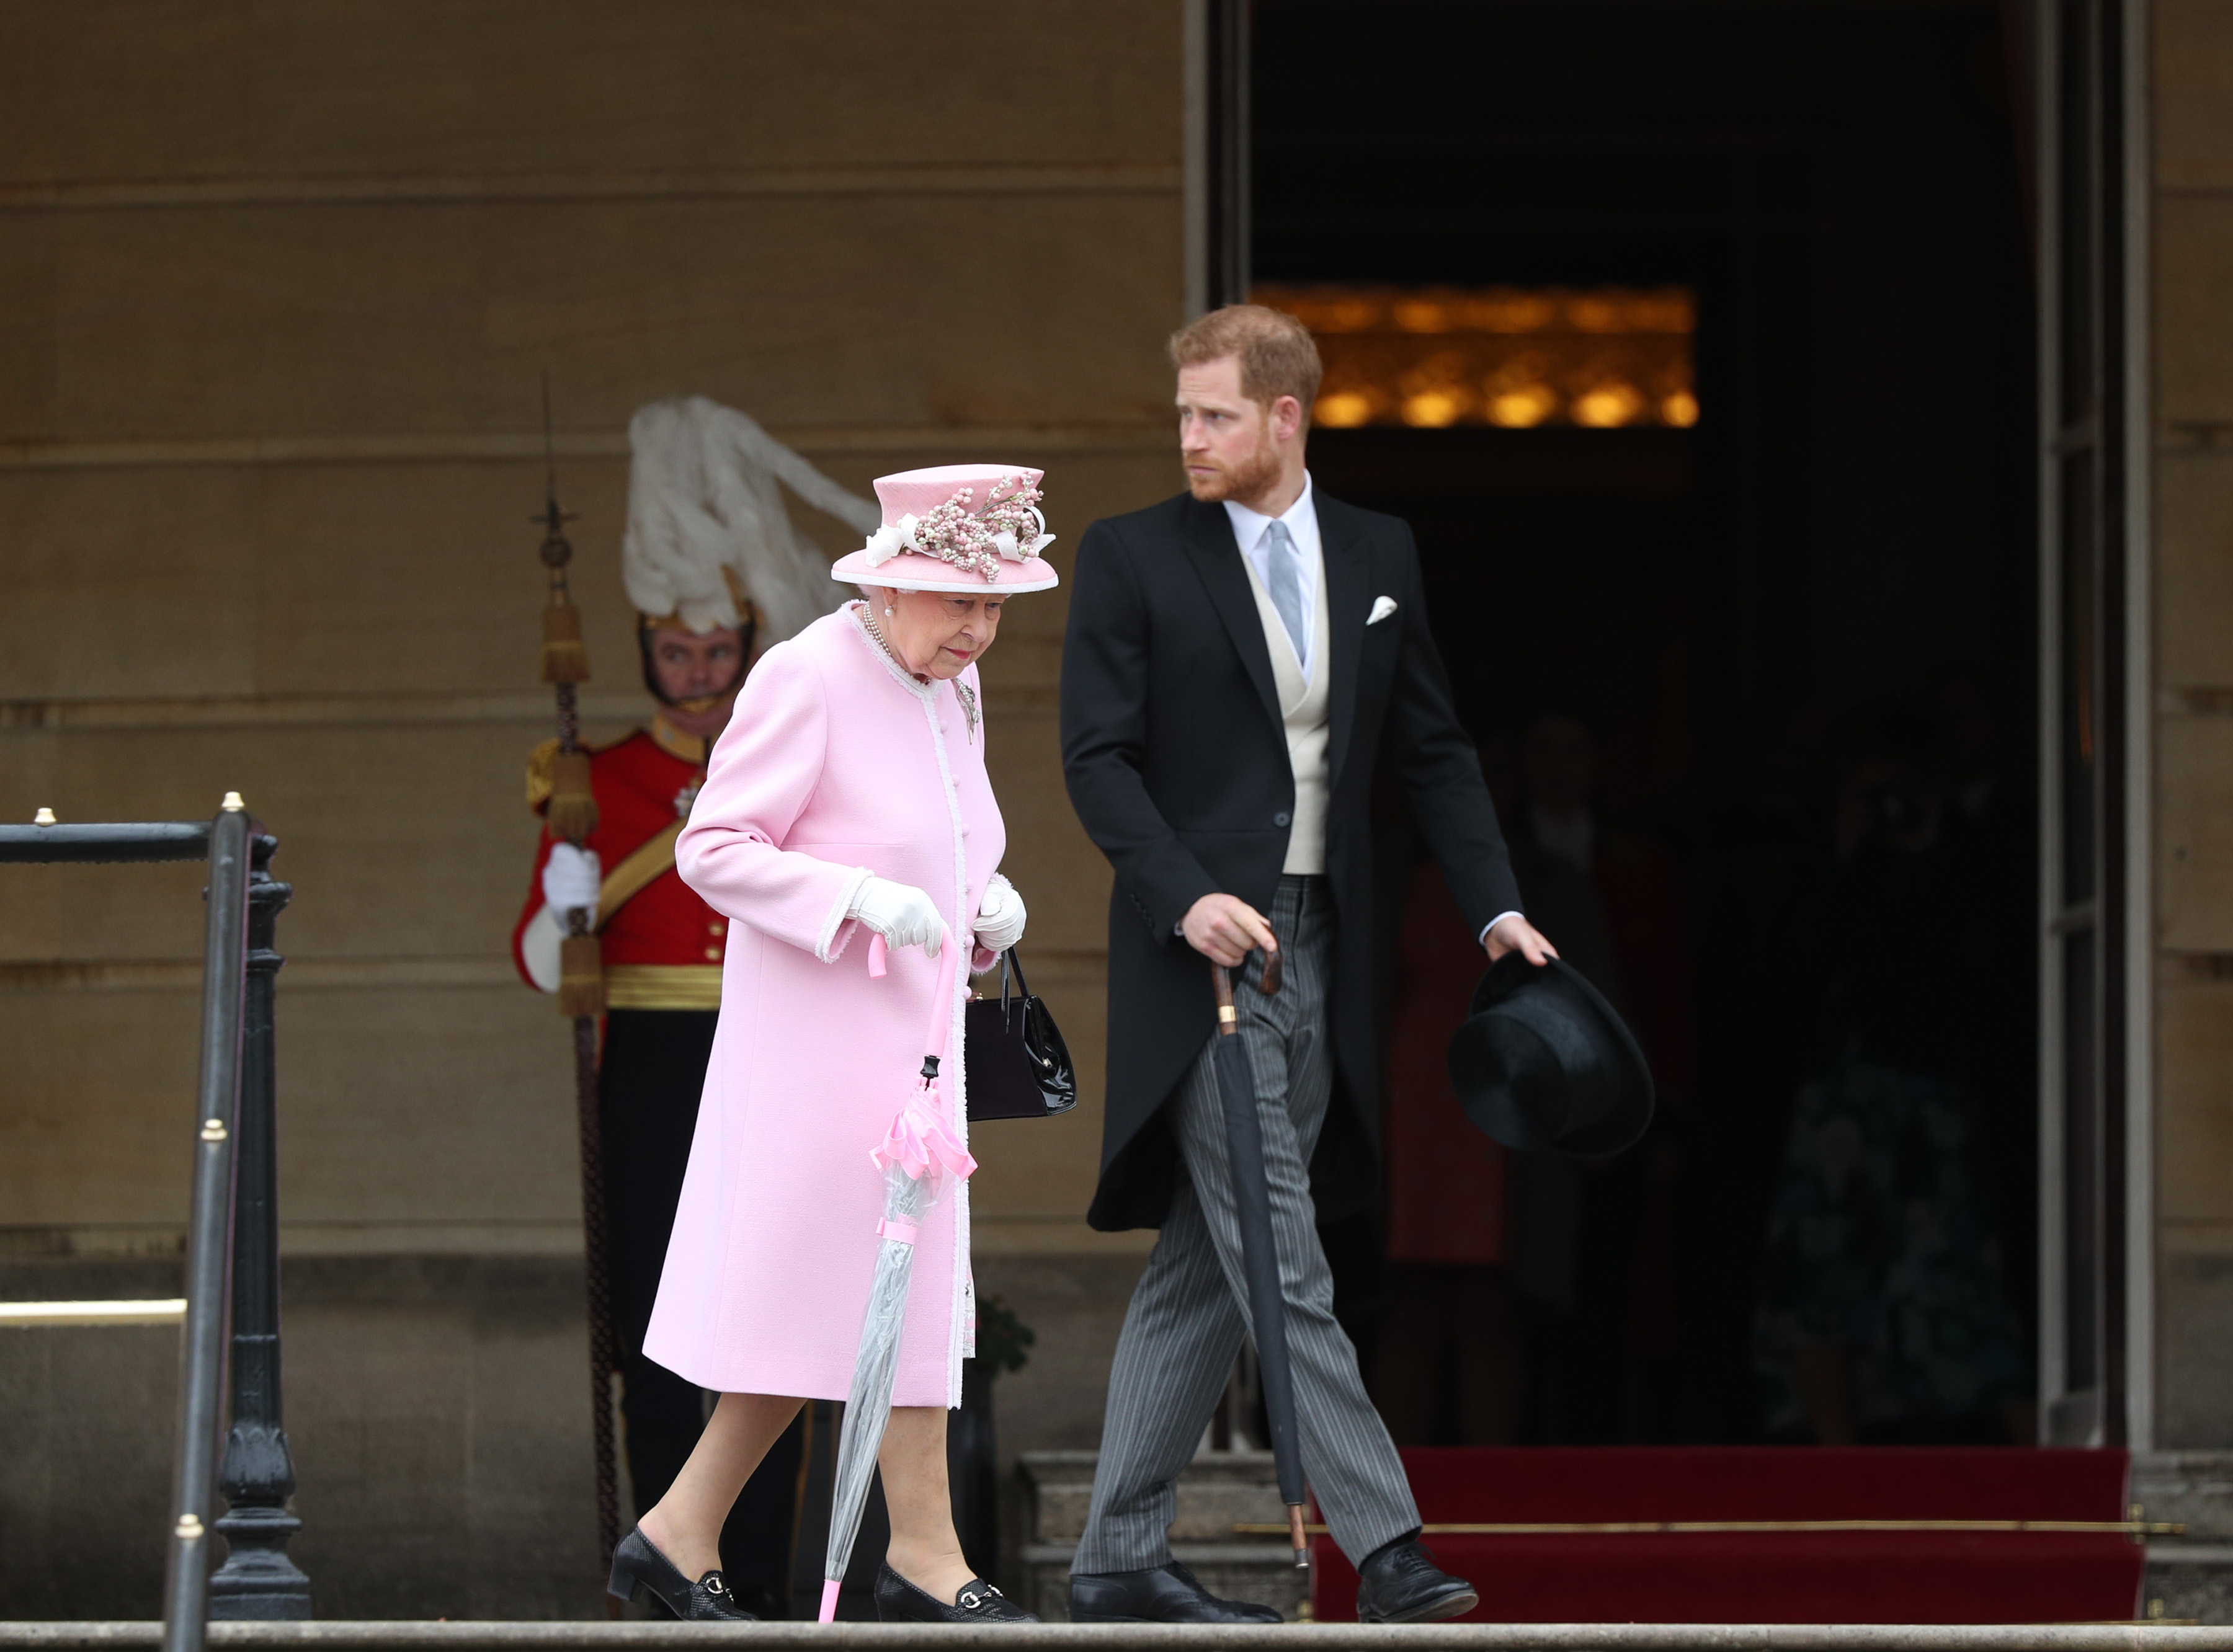 Queen Elizabeth II and Prince Harry walking together toward the Royal Garden Party at Buckingham Palace in 2019